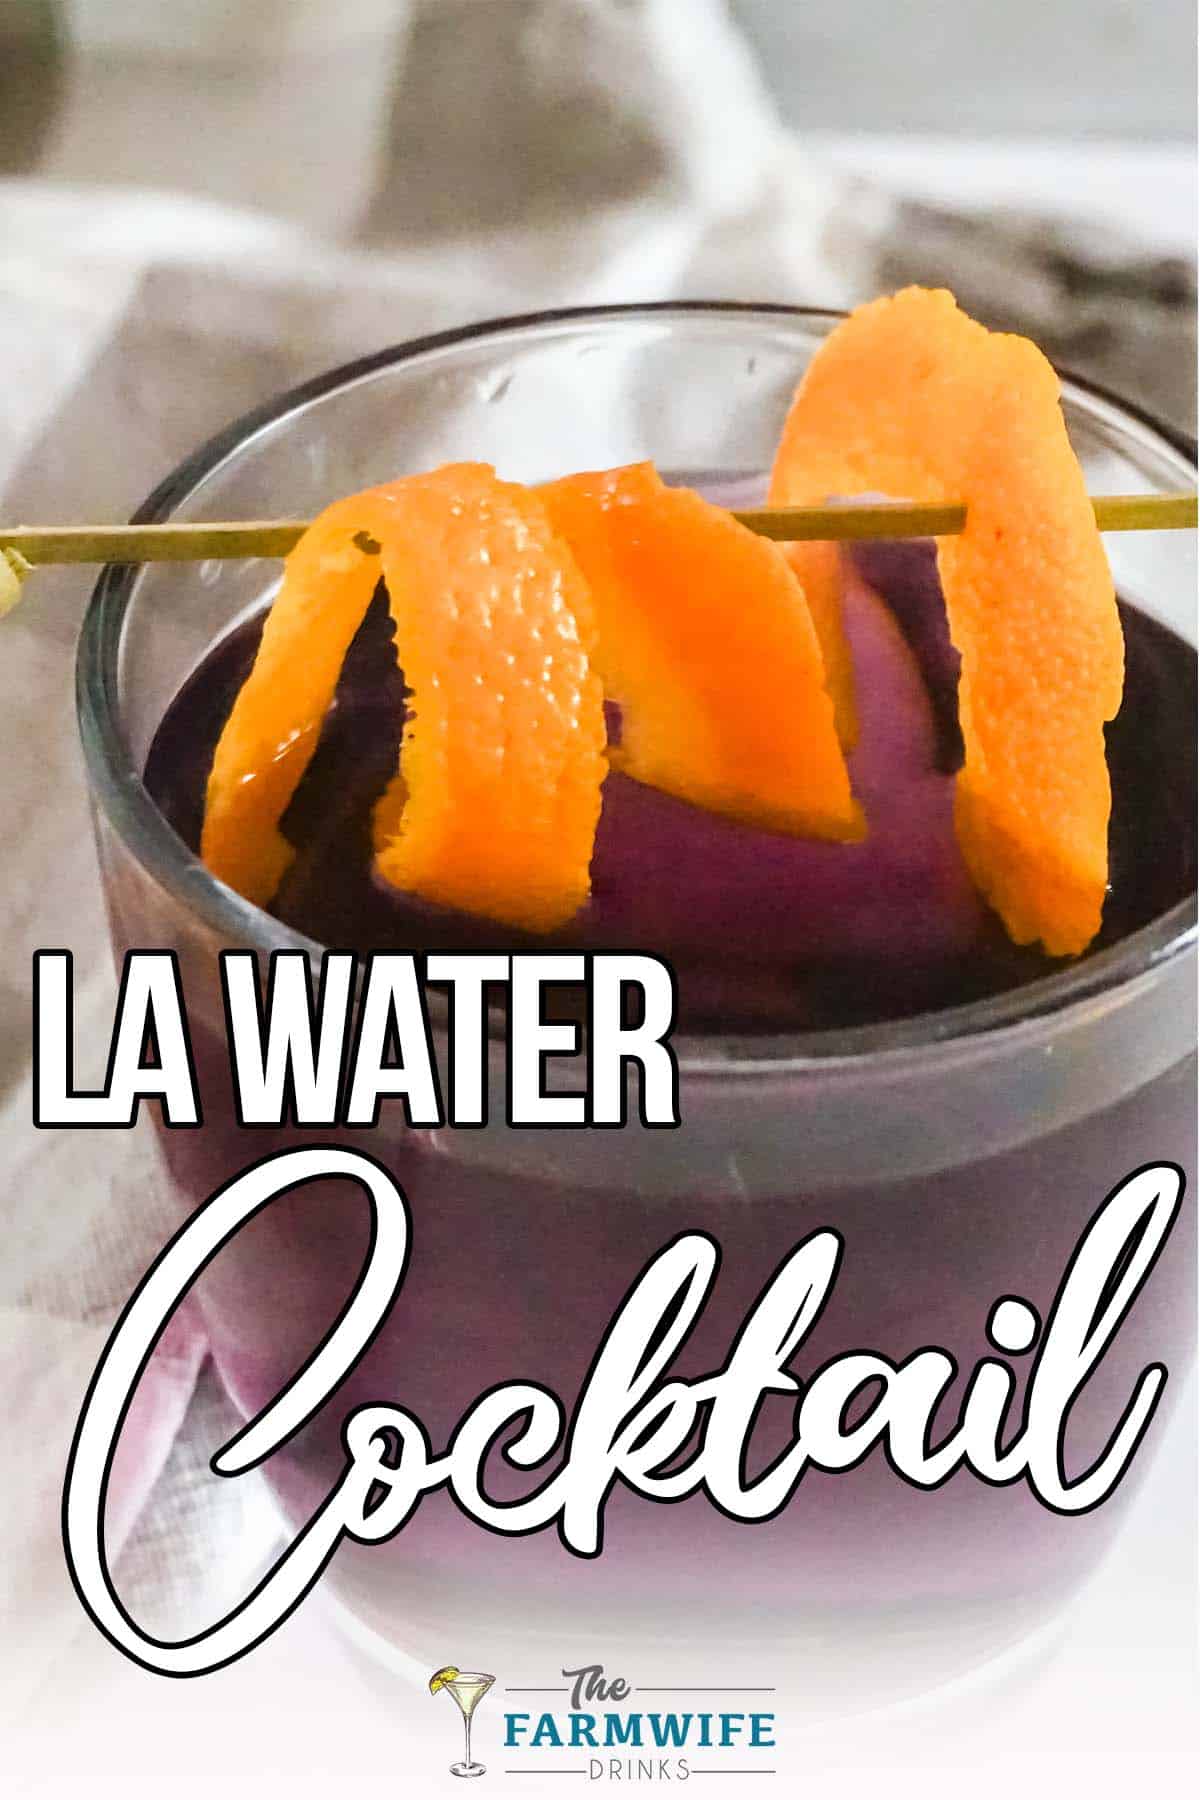 LA Water shot Cocktail with text which reads LA Water Cocktail